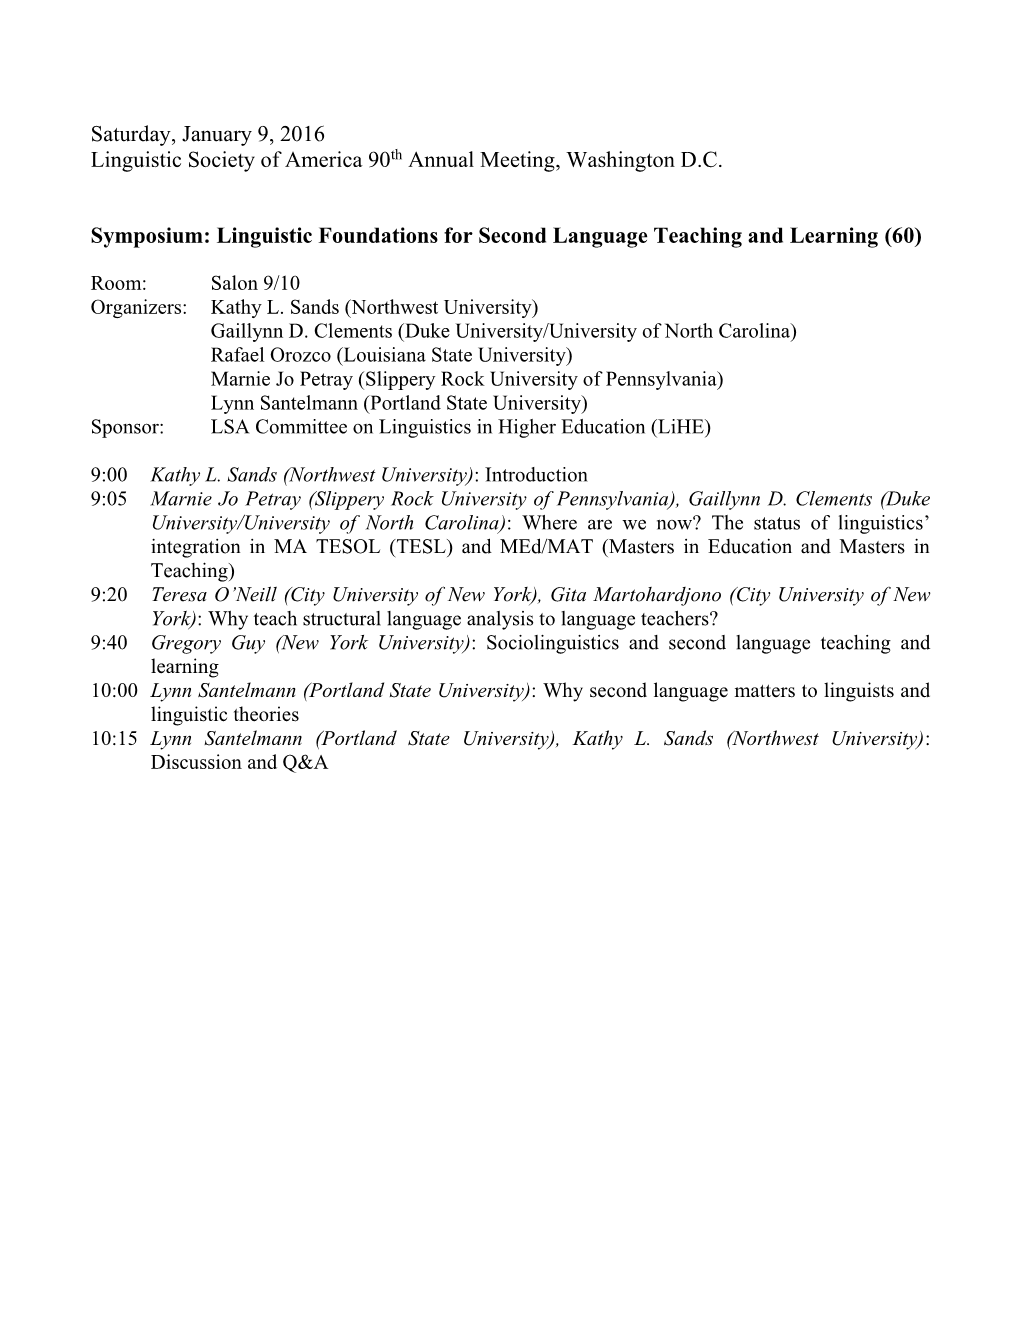 Linguistic Foundations for Second Language Teaching and Learning (60)